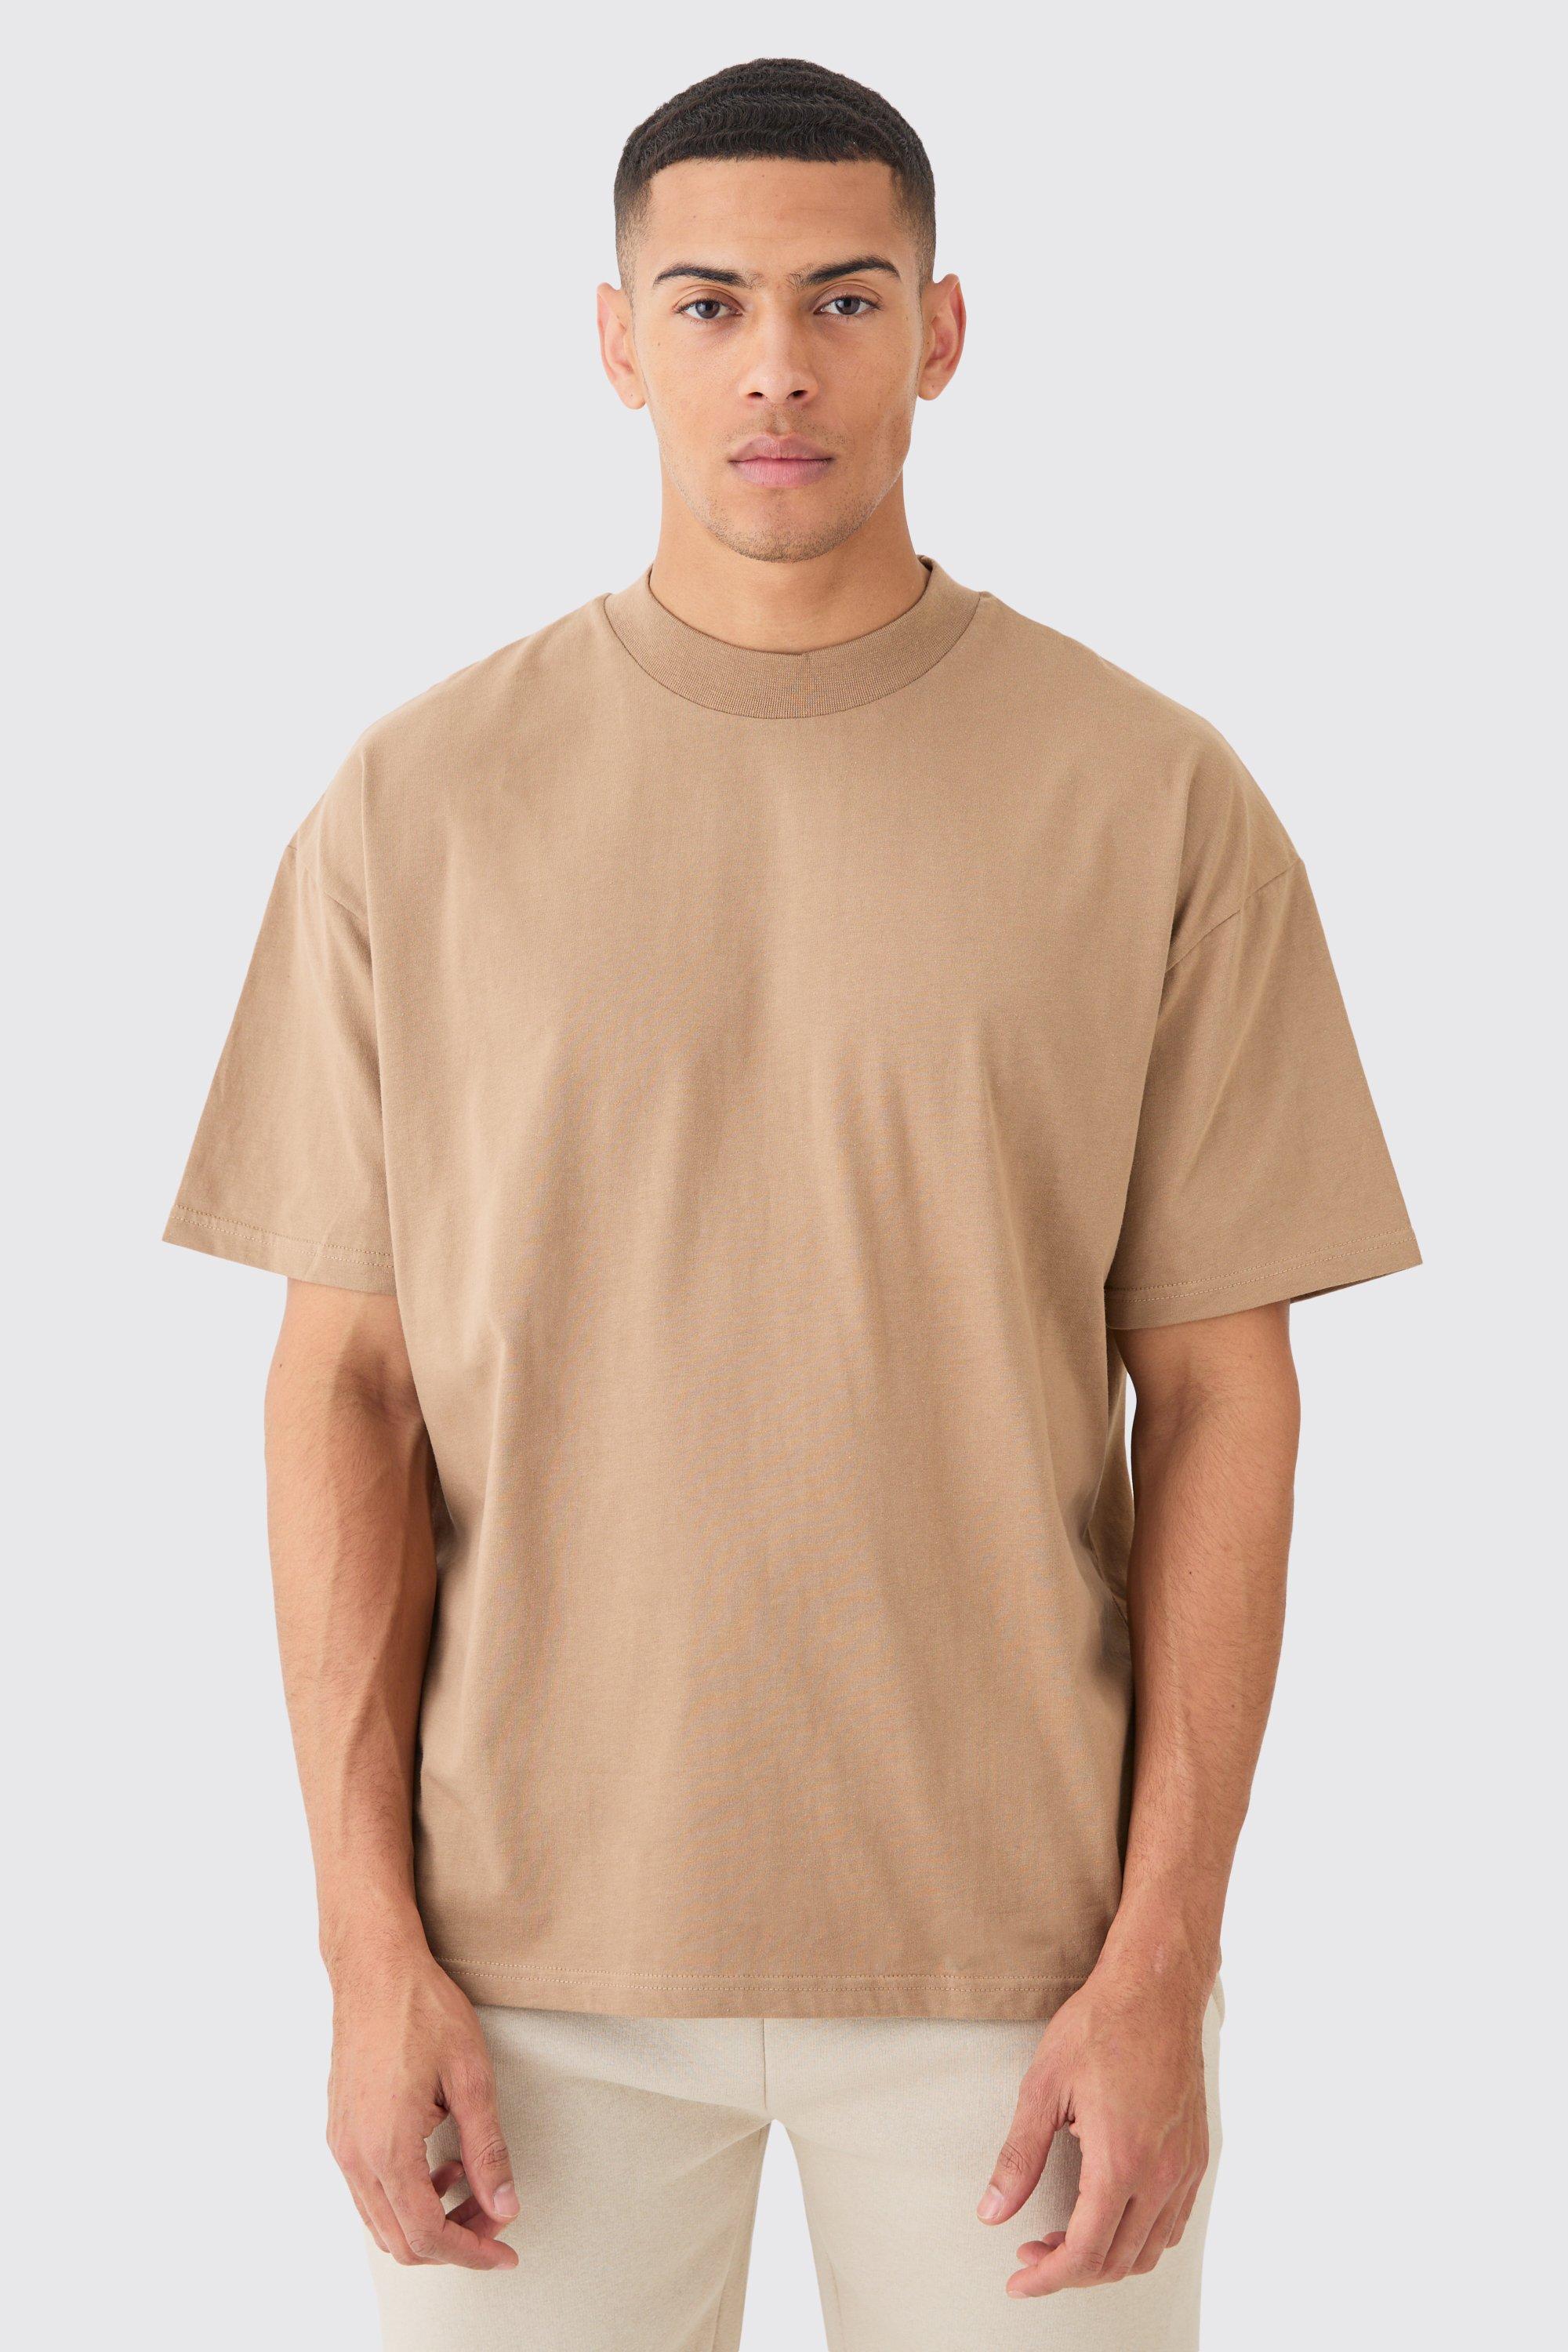 Image of Oversized Extended Neck Heavyweight T-shirt, Brown